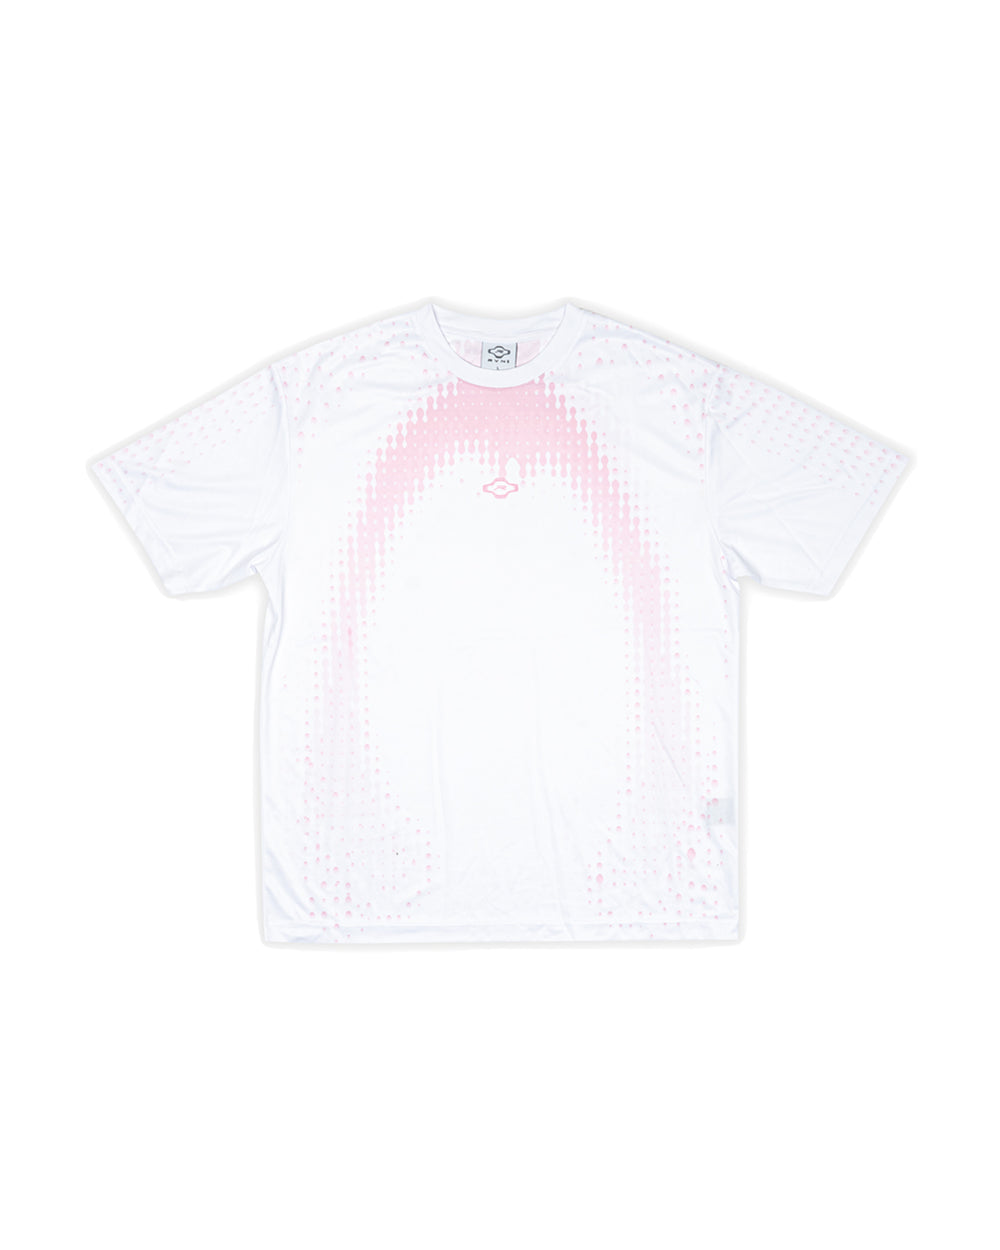 Streetrunner bubble tee pink